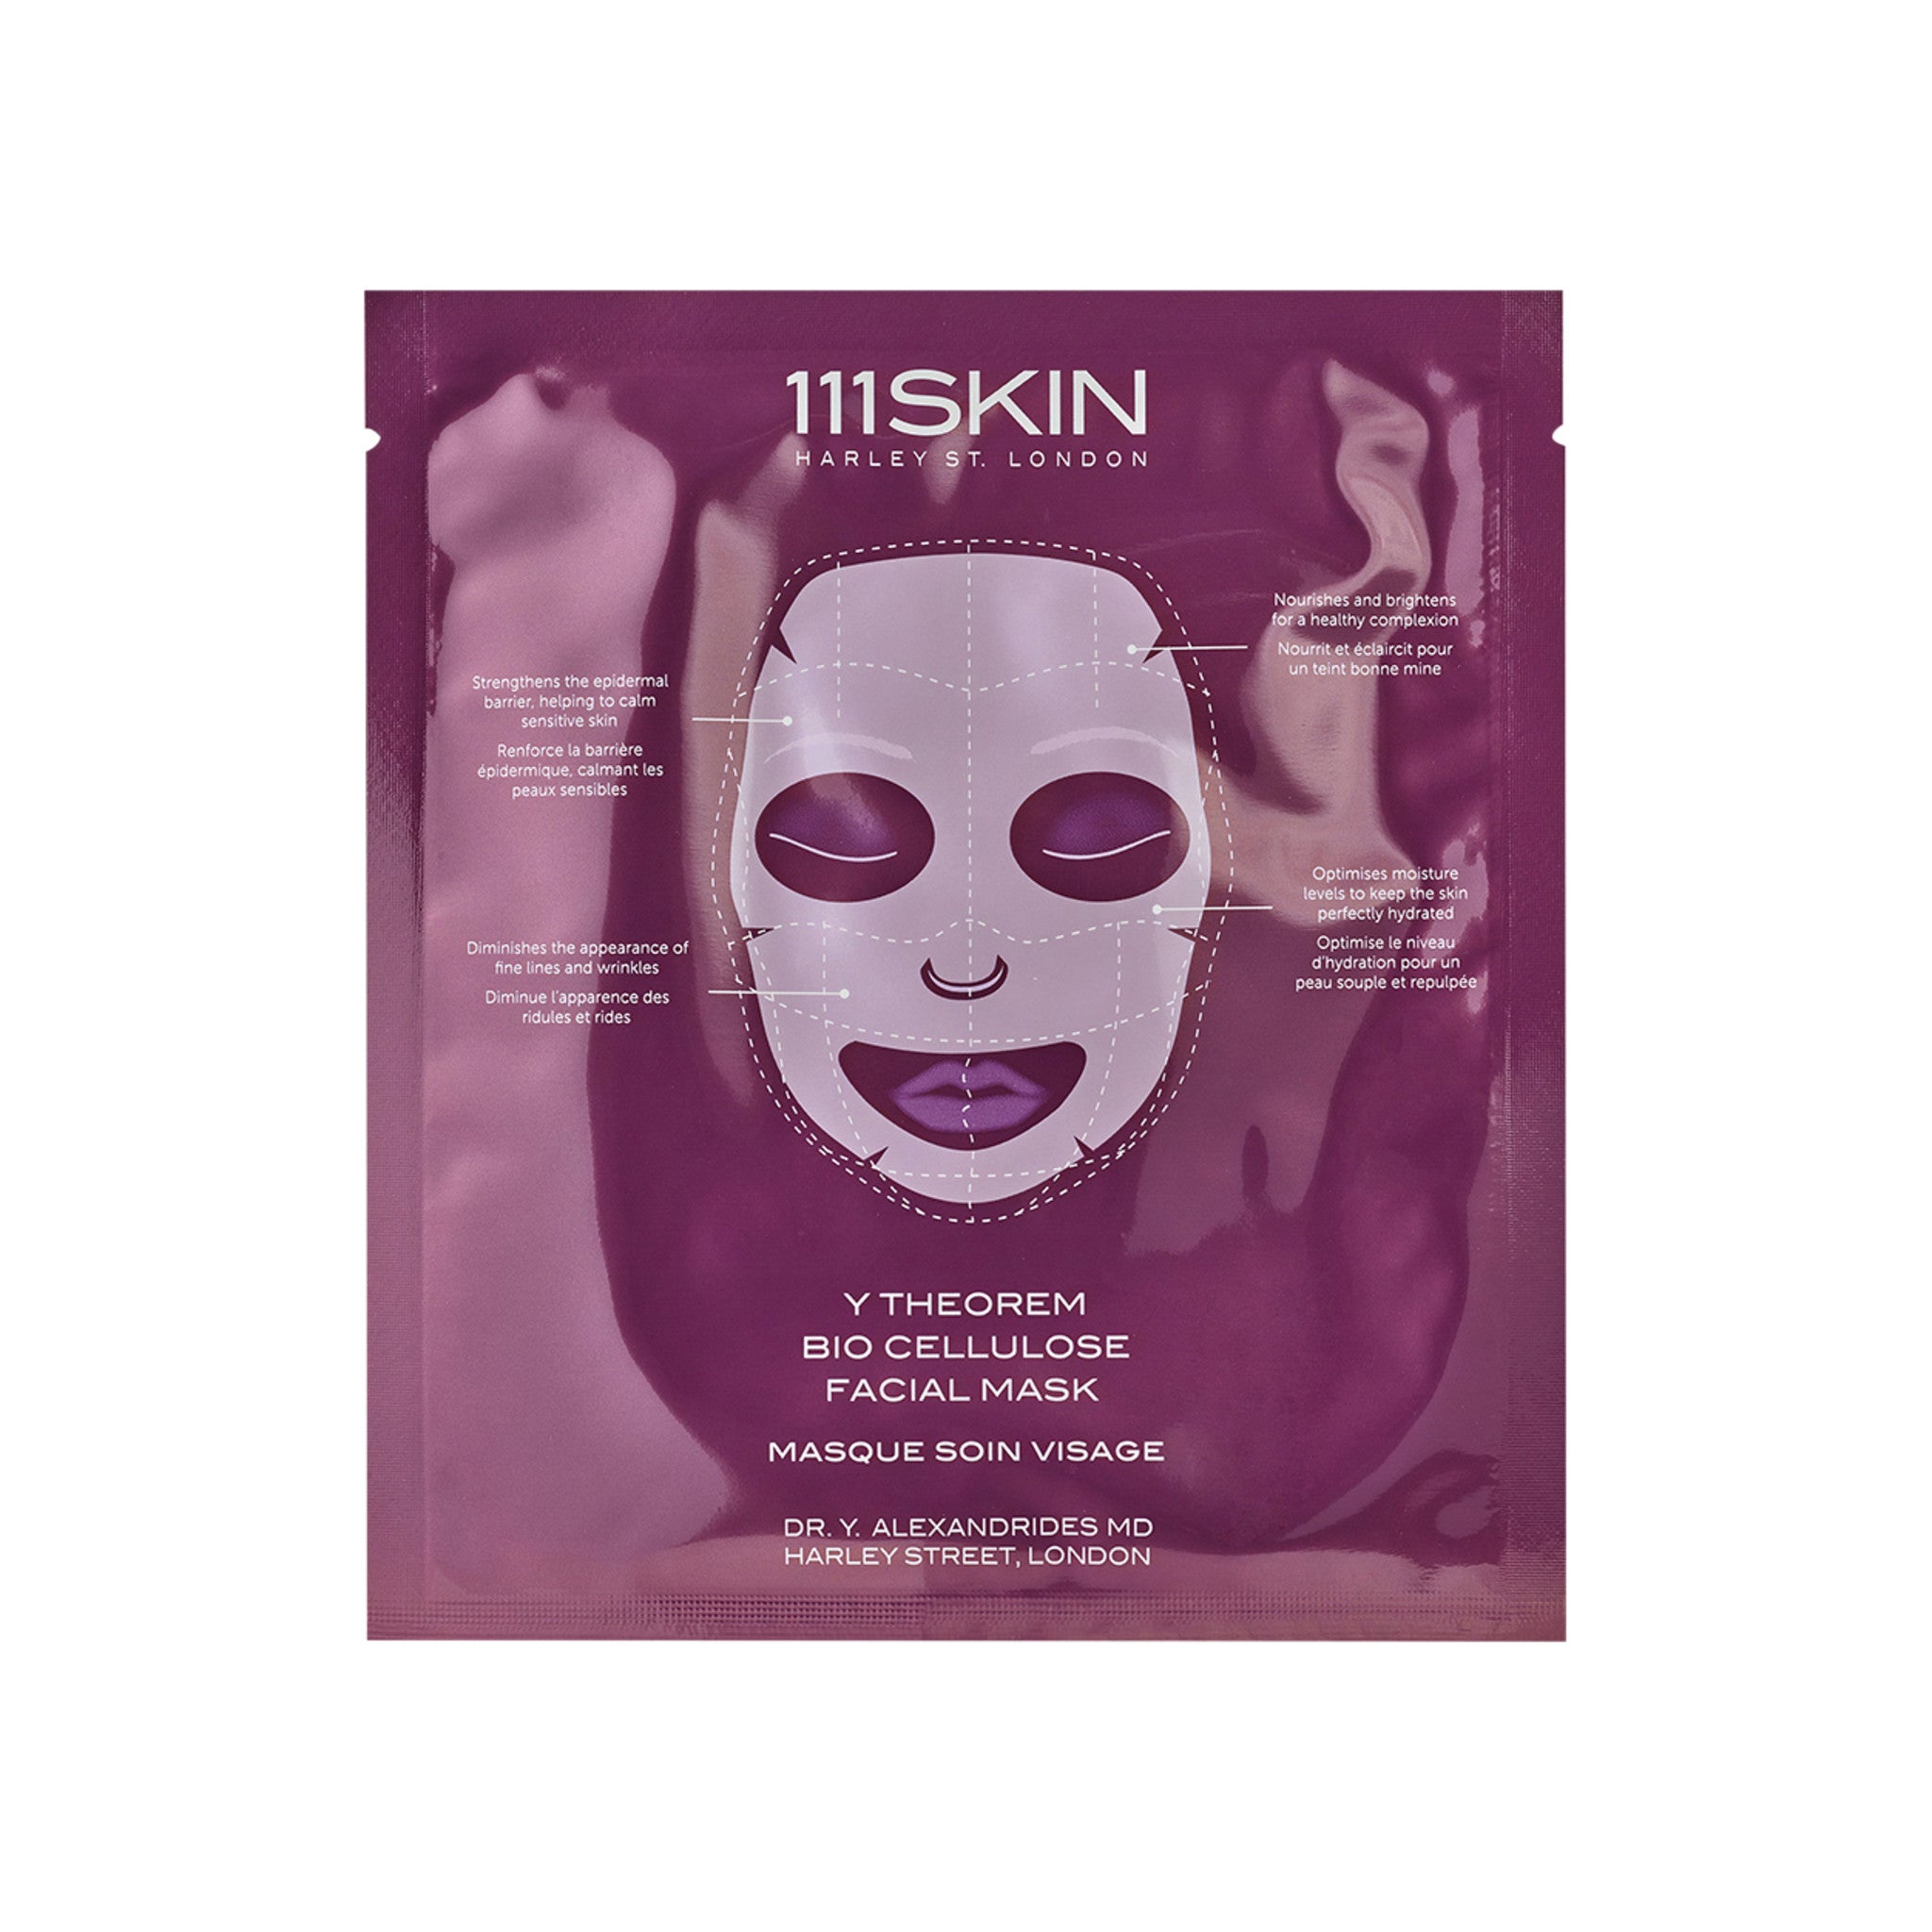 111SKIN Y Theorem Bio Cellulose Facial Mask Size variant: 5 Treatments main image.